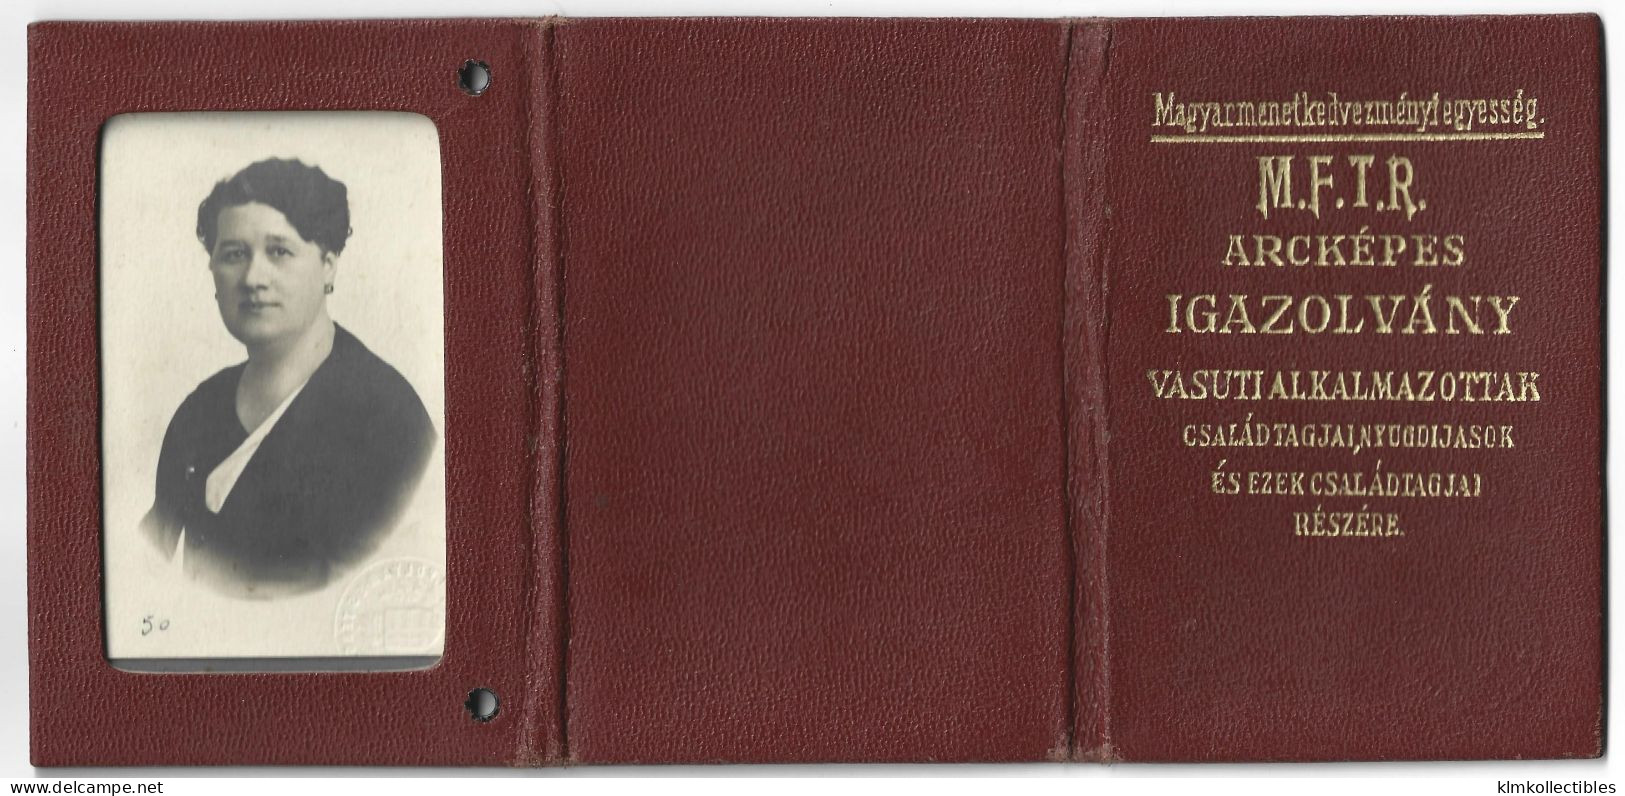 HUNGARY MAGYARRORSZAG - 1936-1940 MFTR IDENTITY CARD - REVENUE STAMPS TIMBRE FISCAL STEUERMARKE - Steuermarken